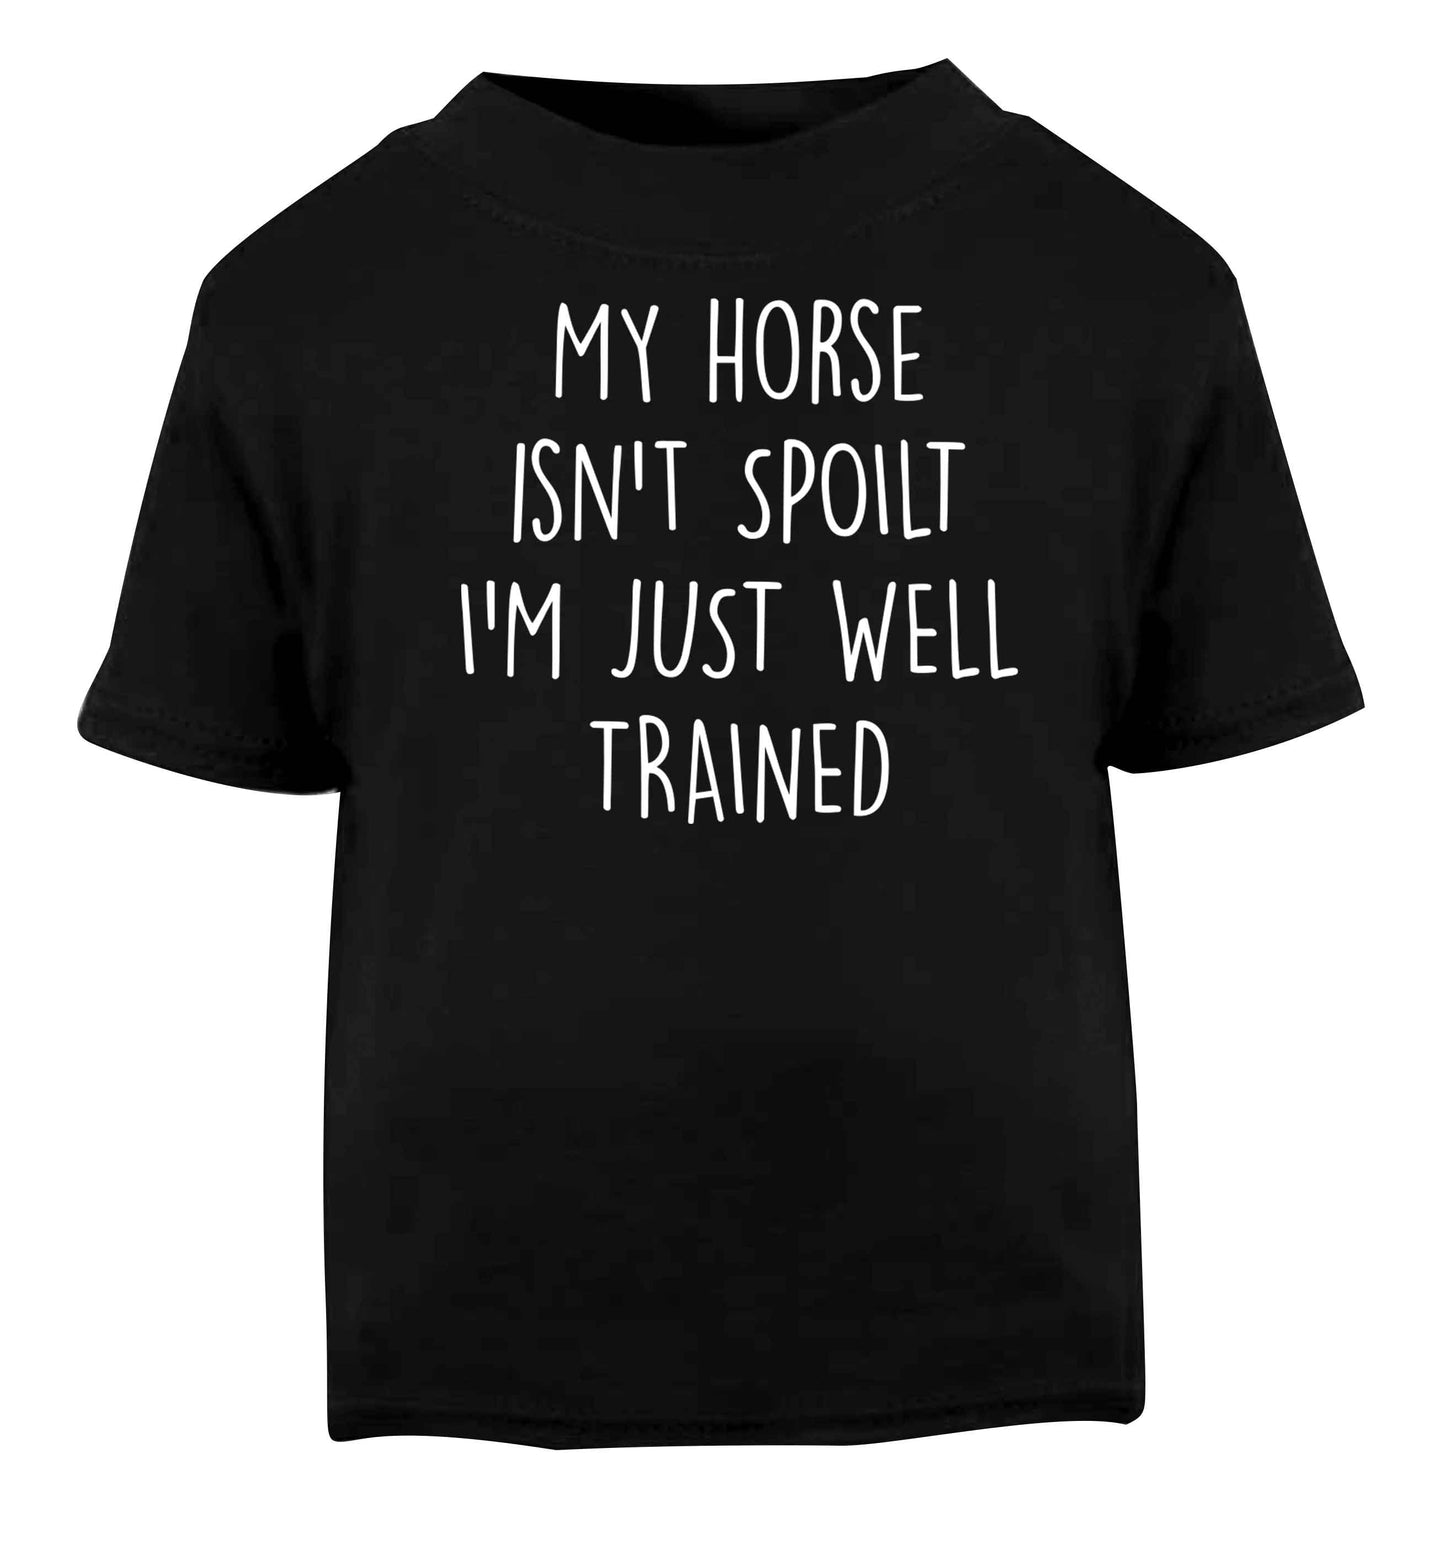 My horse isn't spoilt I'm just well trained Black baby toddler Tshirt 2 years